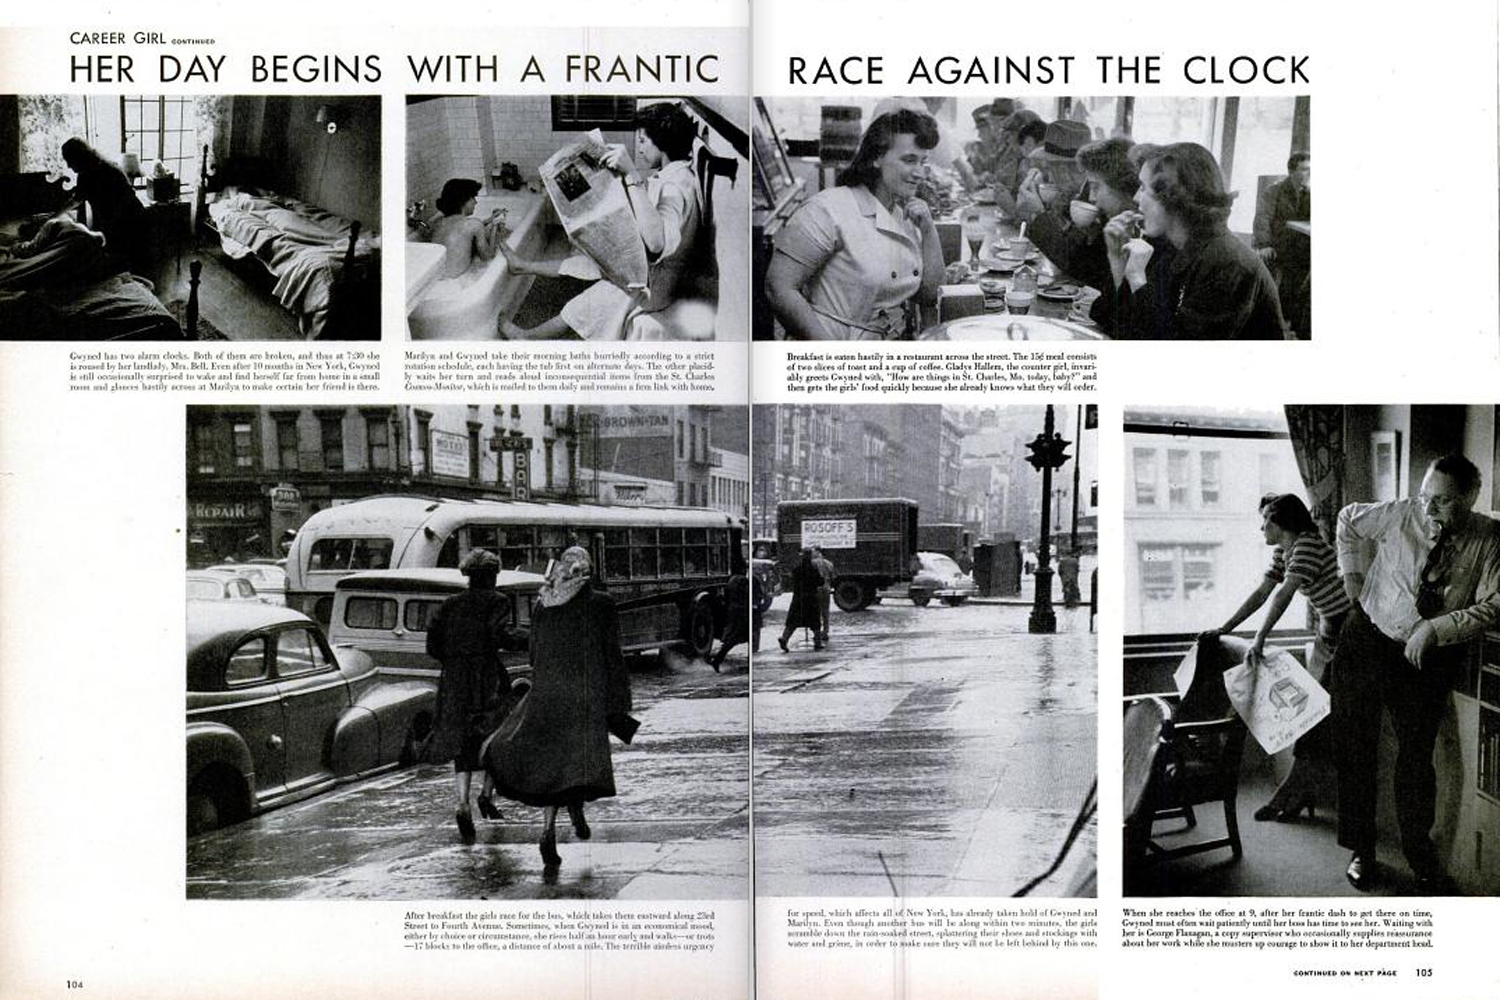 LIFE magazine, May 3, 1948. NOTE: Best viewed in "Full Screen" mode; see button at right.